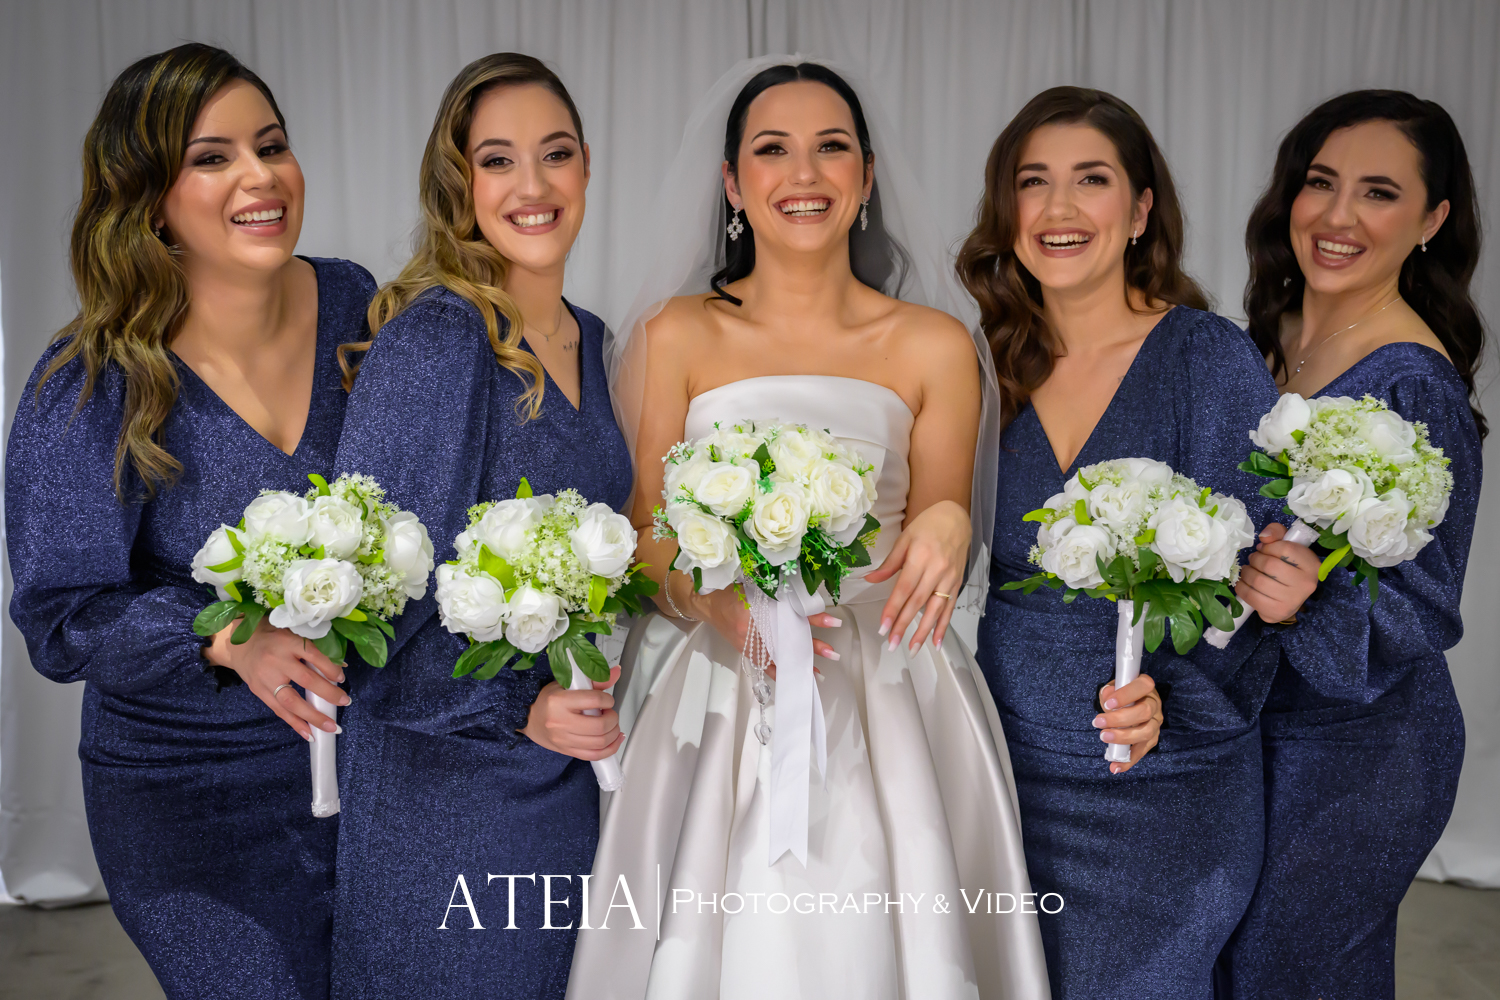 , Bujare and Alessandro&#8217;s wedding at Overnewton Castle captured by ATEIA Photography &#038; Video